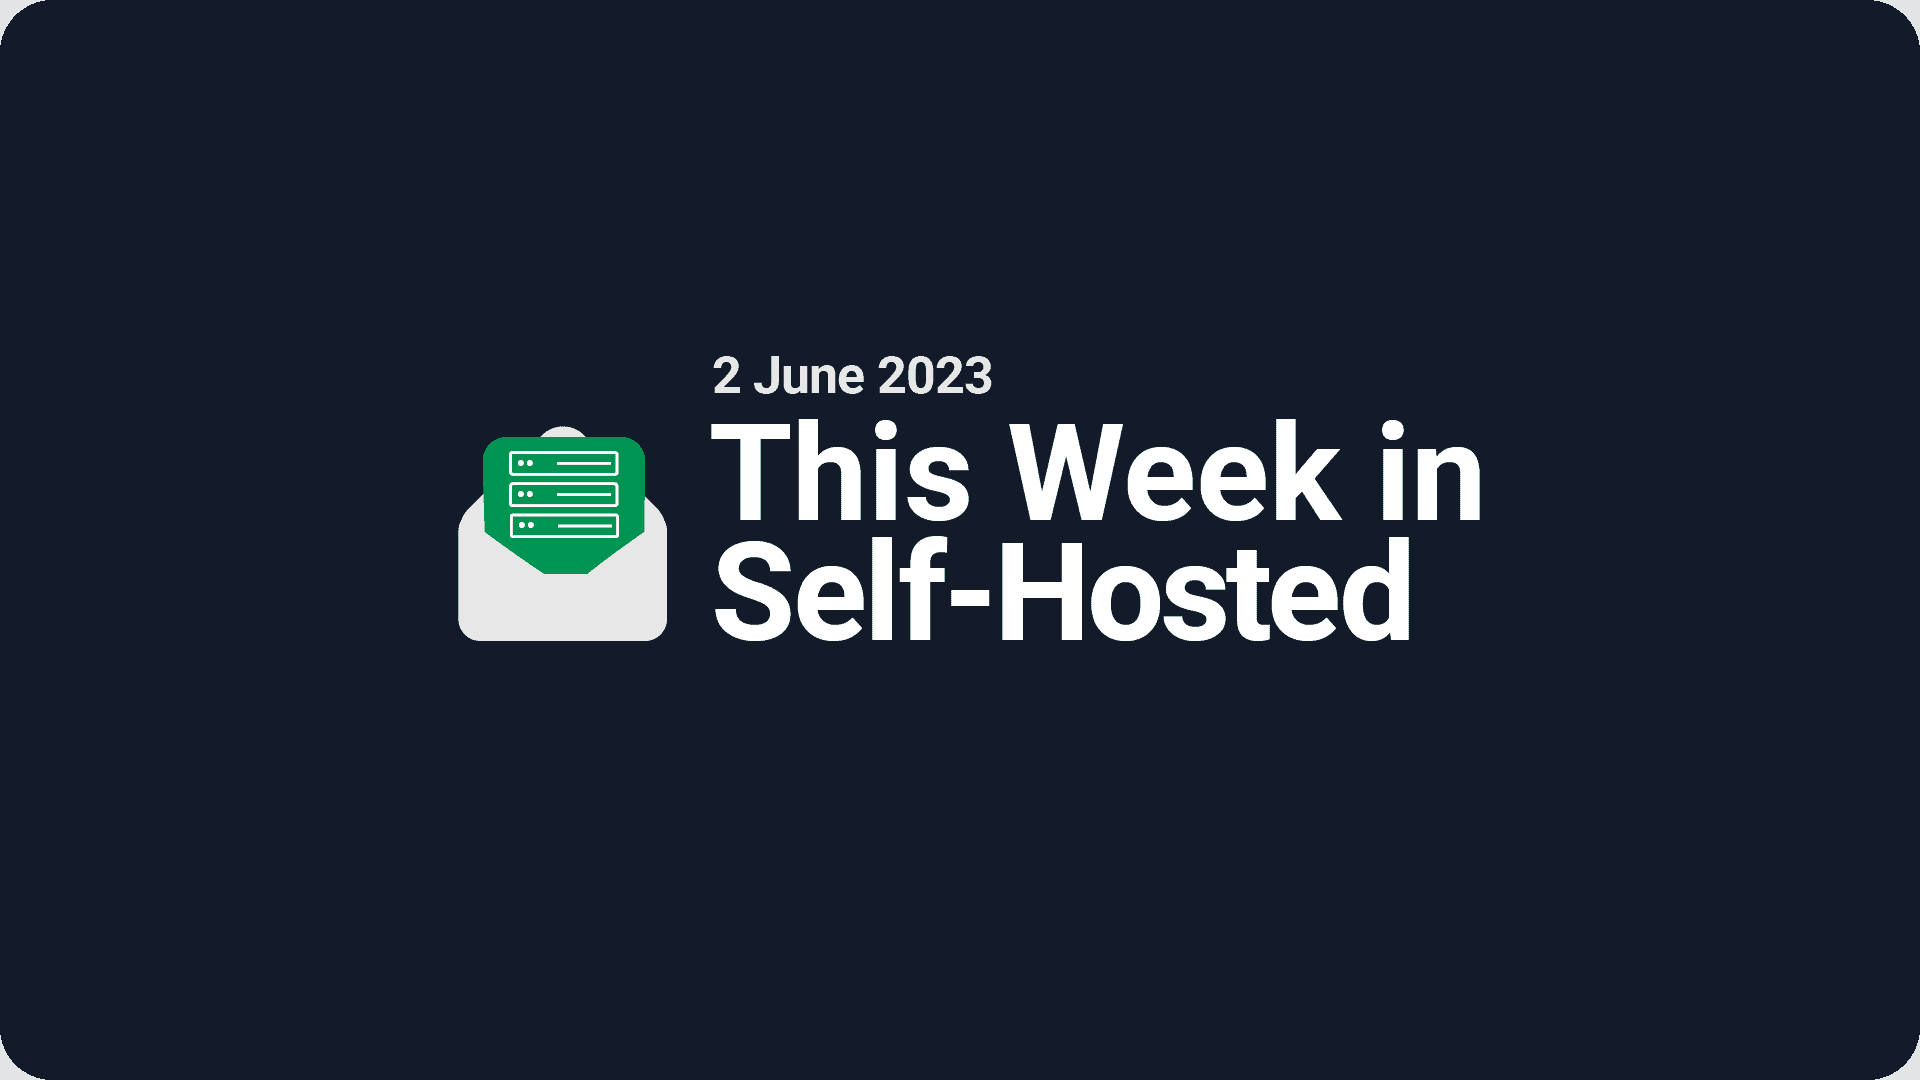 This Week in Self-Hosted (2 June 2023) Post image